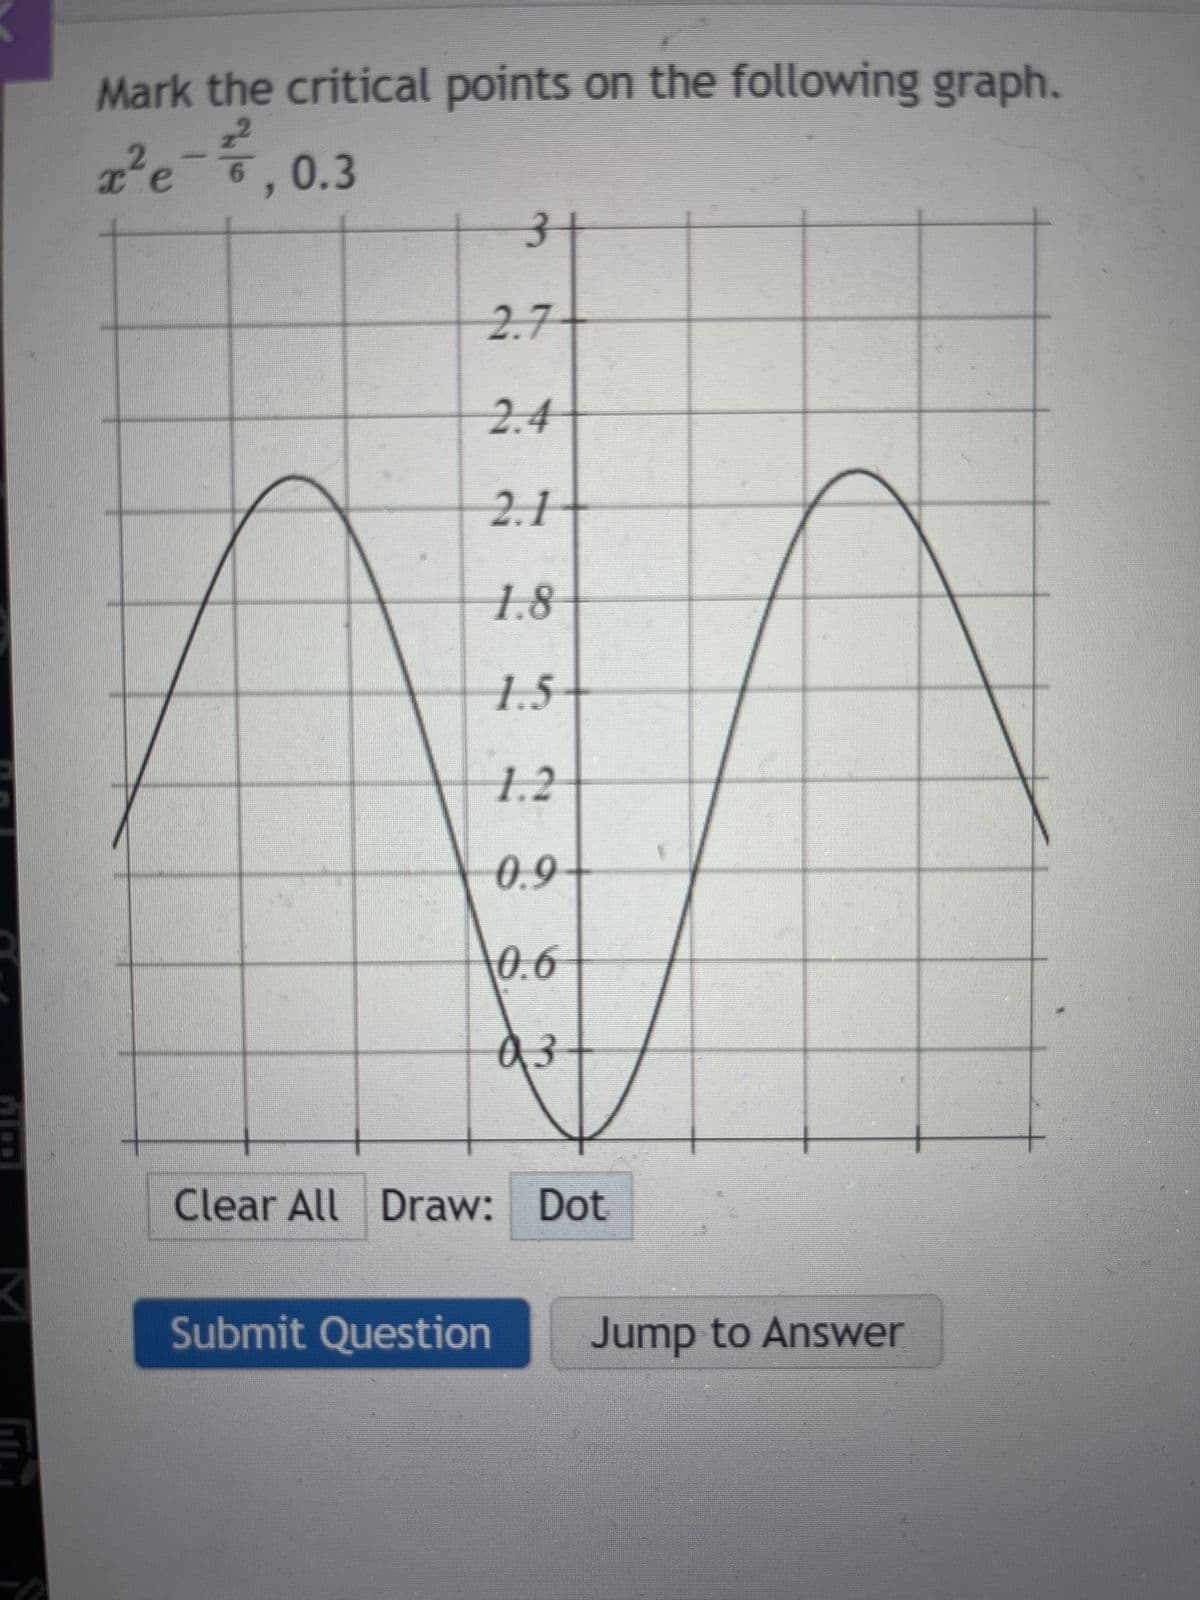 HAPE
Mark the critical points on the following graph.
z²e-,0.3
2
3+
2.7
2.4
2.1
1.8
1.5
1.2
0.9
0.6
A3
Clear All Draw: Dot
Submit Question
Jump to Answer